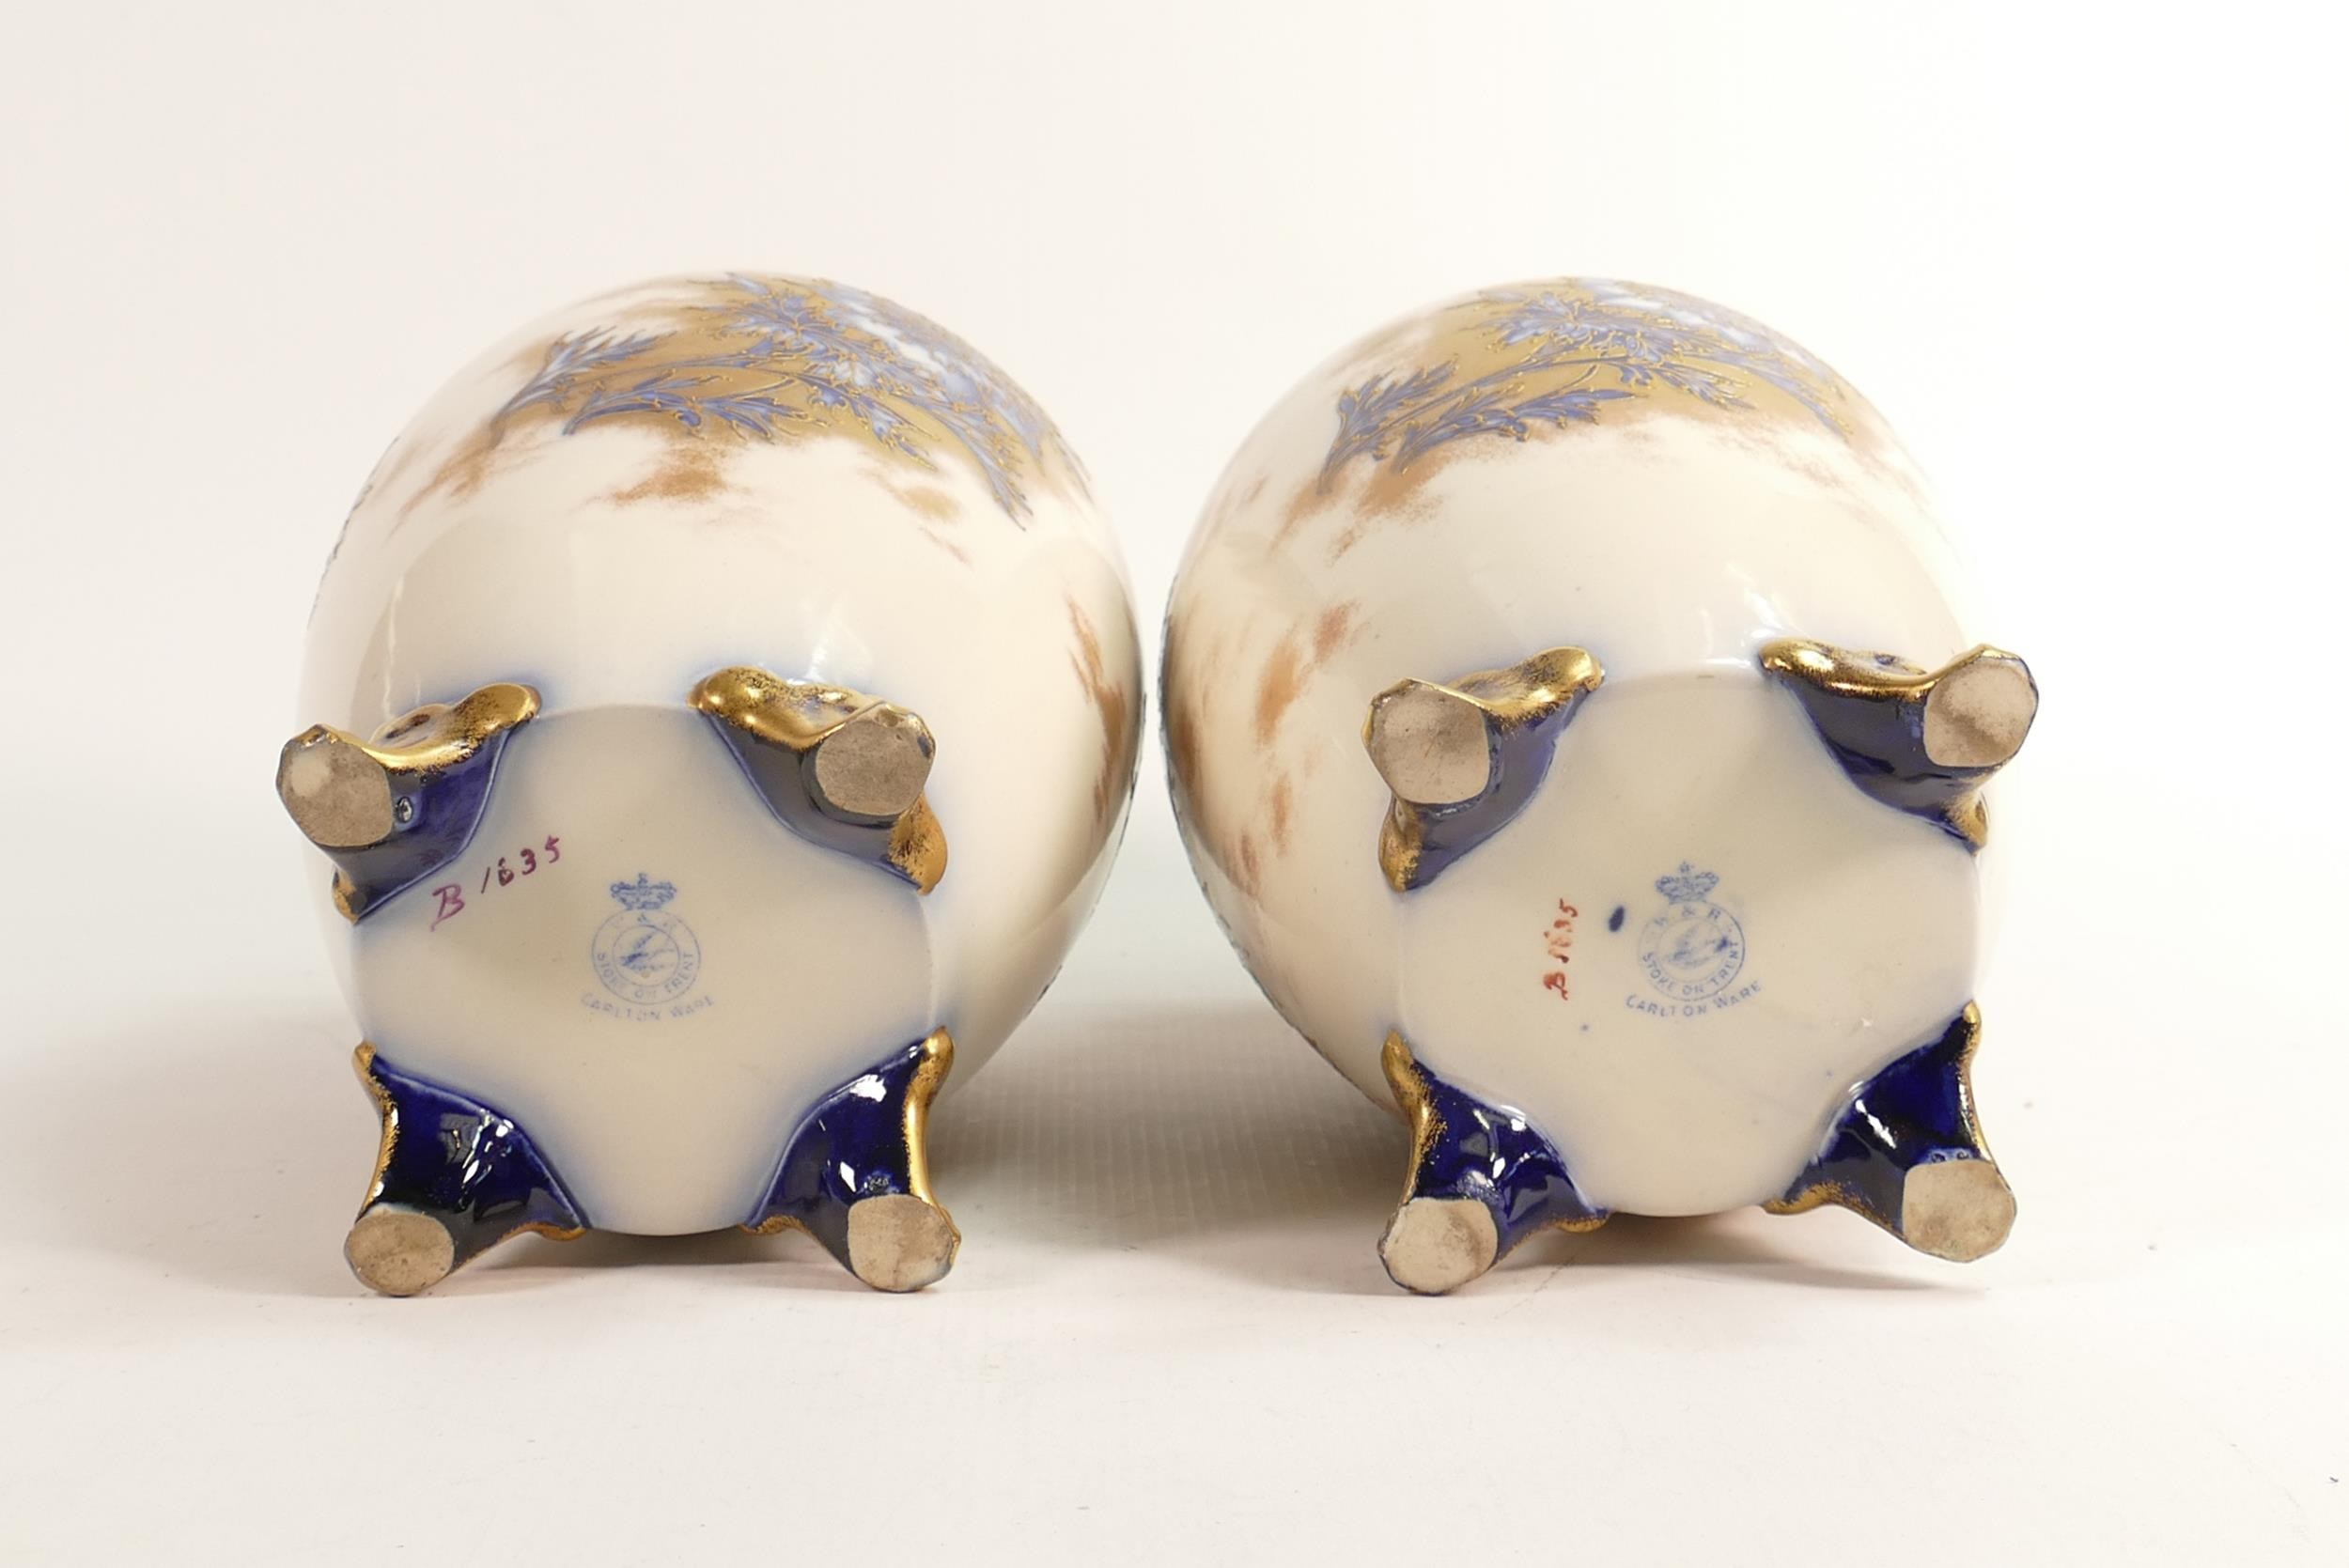 Pair of Carlton Blush ware large footed vase with blue & white floral decoration, by Wiltshaw & - Image 2 of 4